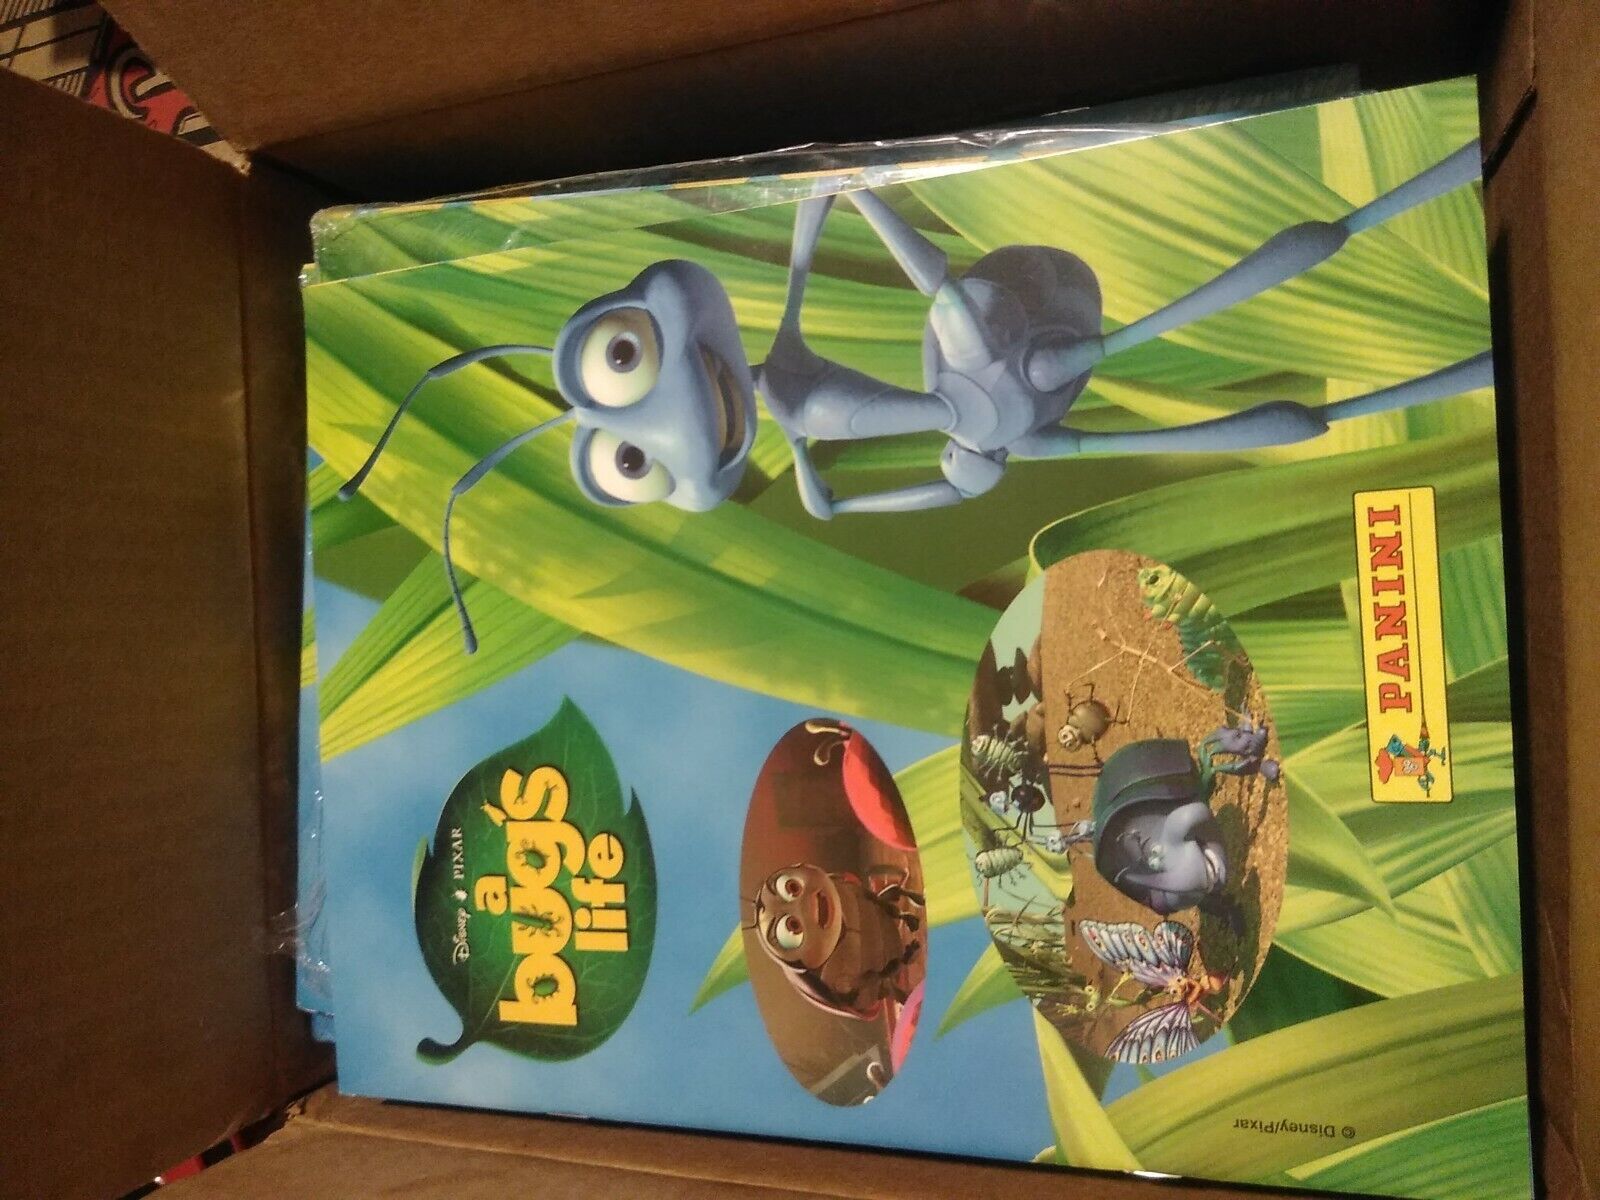 Disney pixar A BUGS LIFE Panini STICKER ALBUM + with STICKERS POSTERS inside NEW